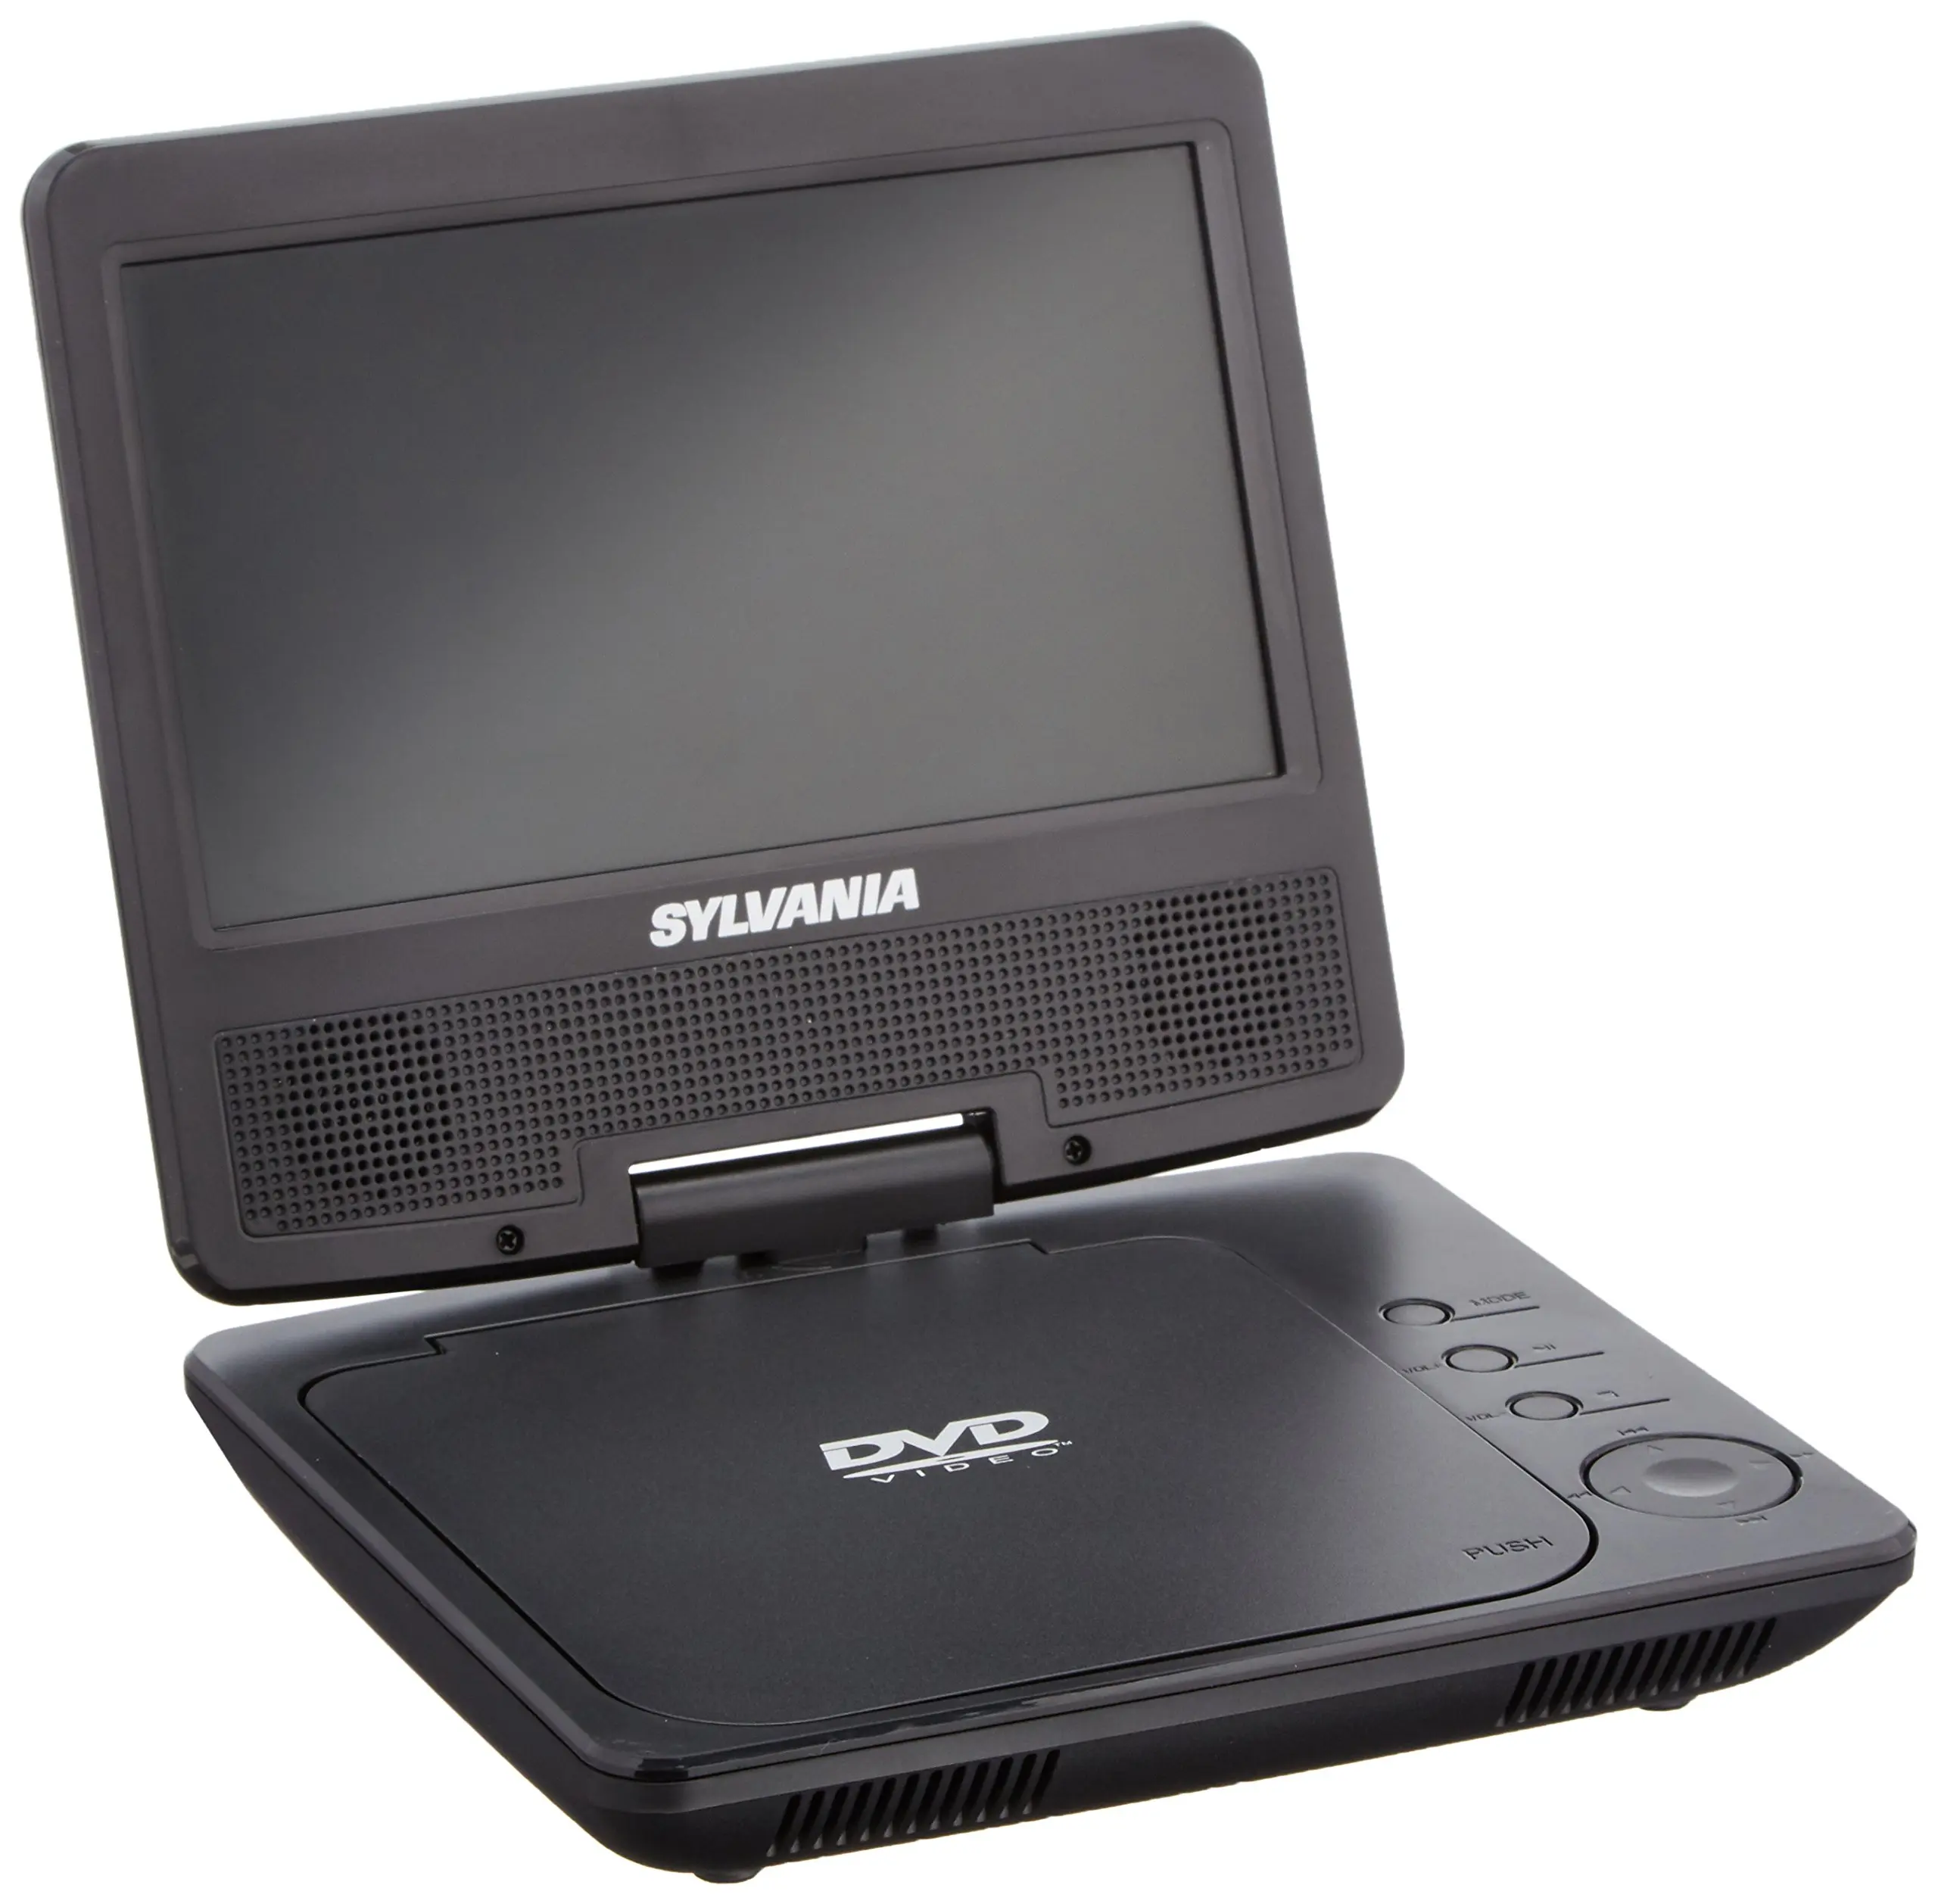 Cheap Refurbished Portable Dvd Player, find Refurbished Portable Dvd